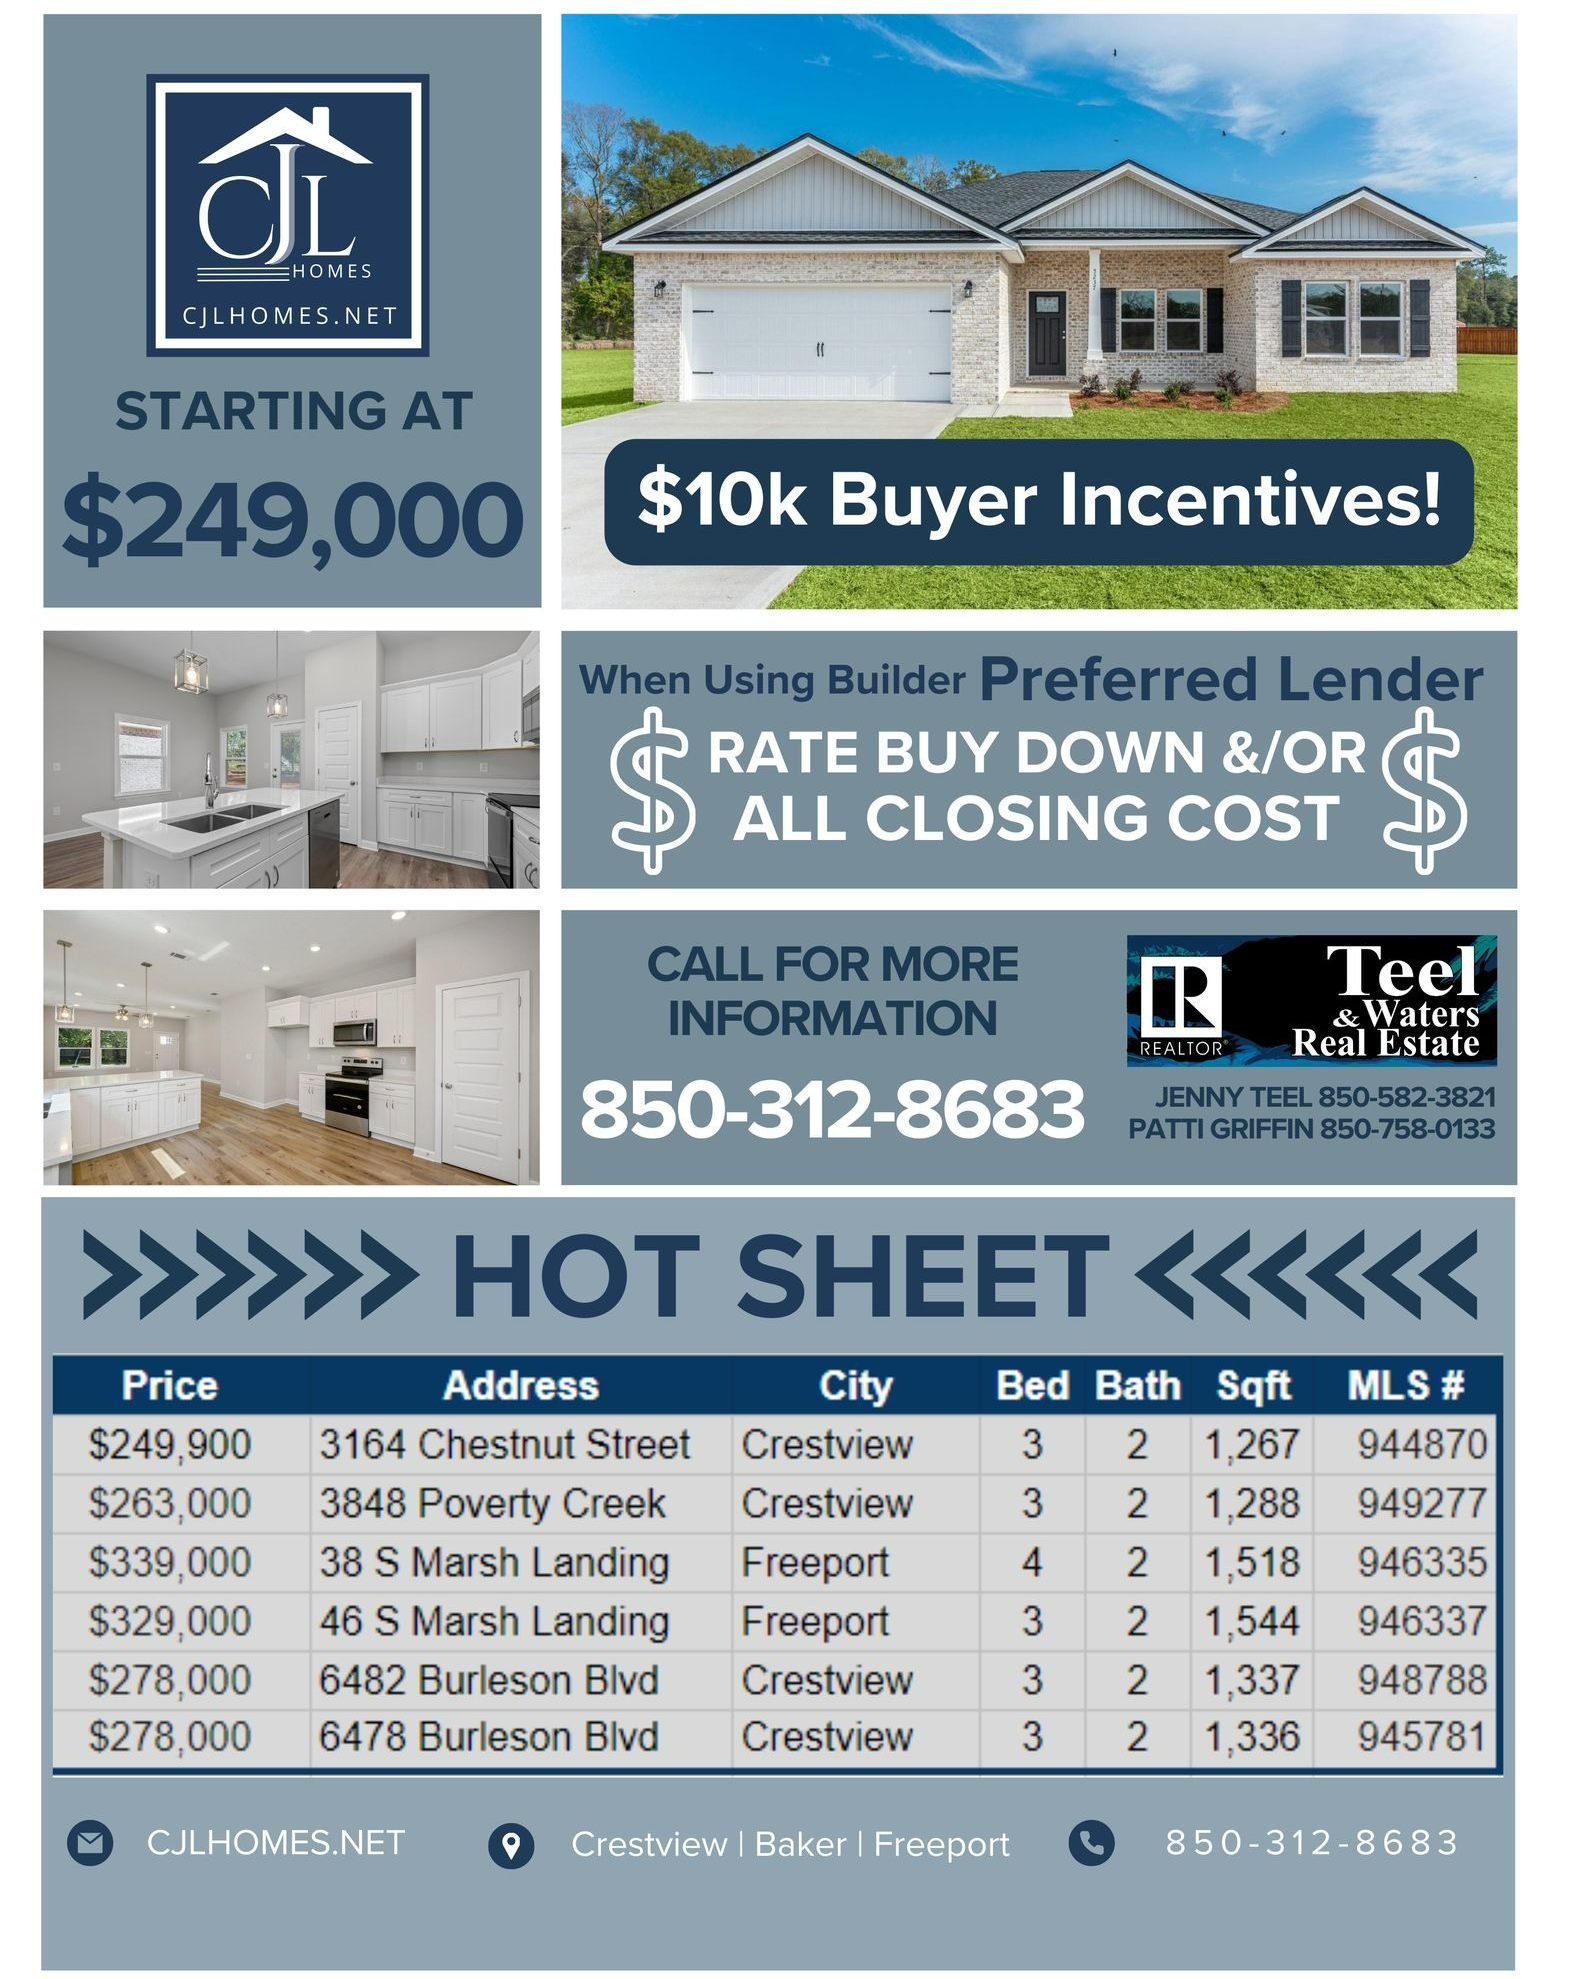 🔥🏠 *Hot Deal Alert from CJL Homes!* 🏠🔥
Searching for your dream home? Look no further! Starting at just $249,000, our homes in Crestview and Freeport are waiting for you! Plus, we're offering an exclusive buyer incentive: receive up to $10,000 to